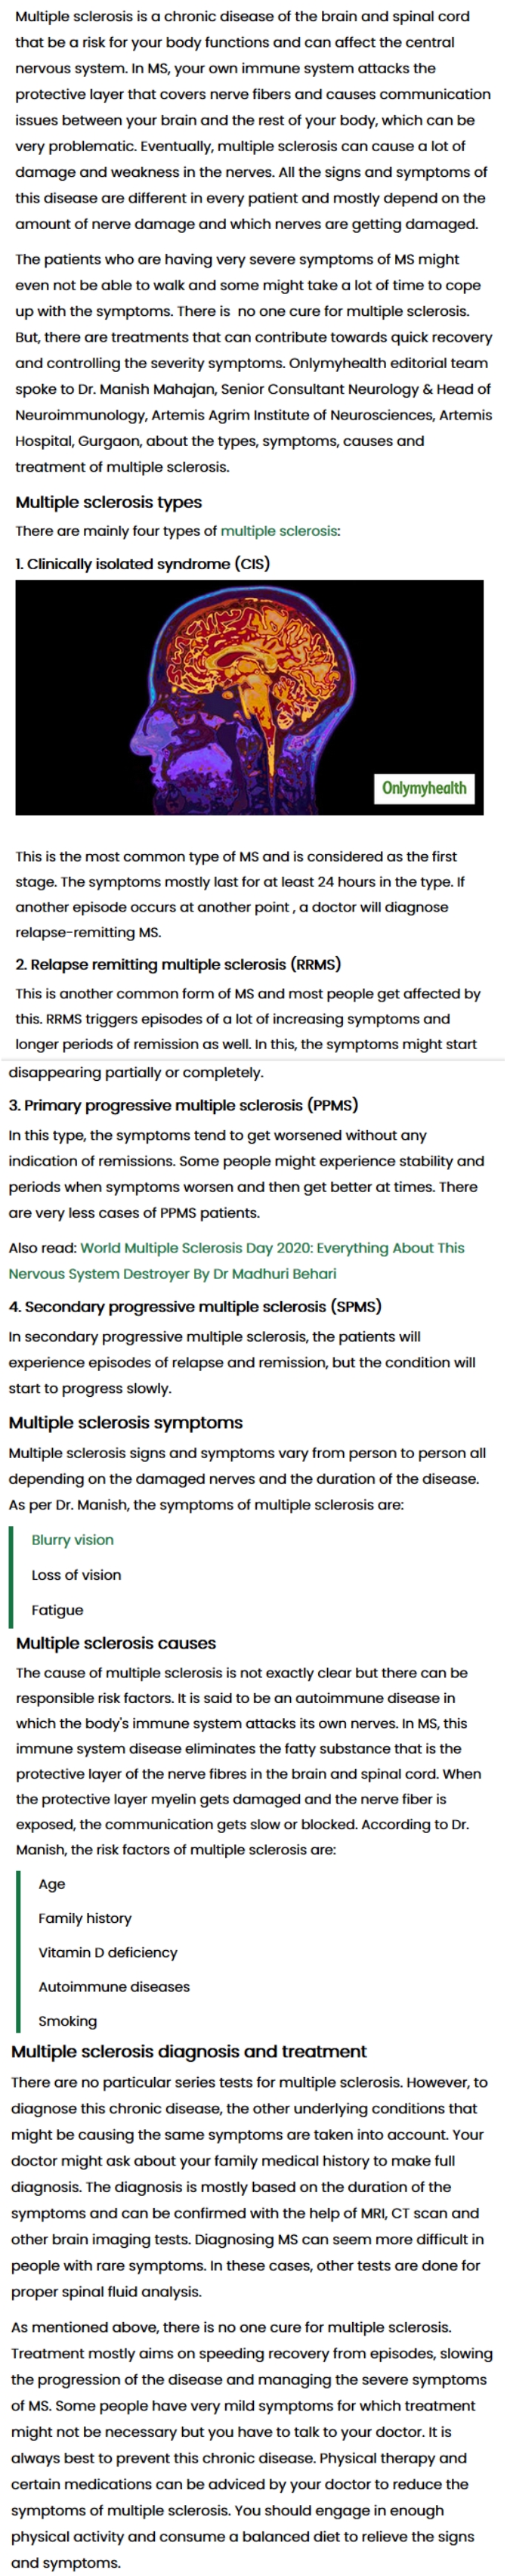 multiple-sclerosis-awareness-month-know-the-types-symptoms-causes-and-treatment-of-this-chronic-disease